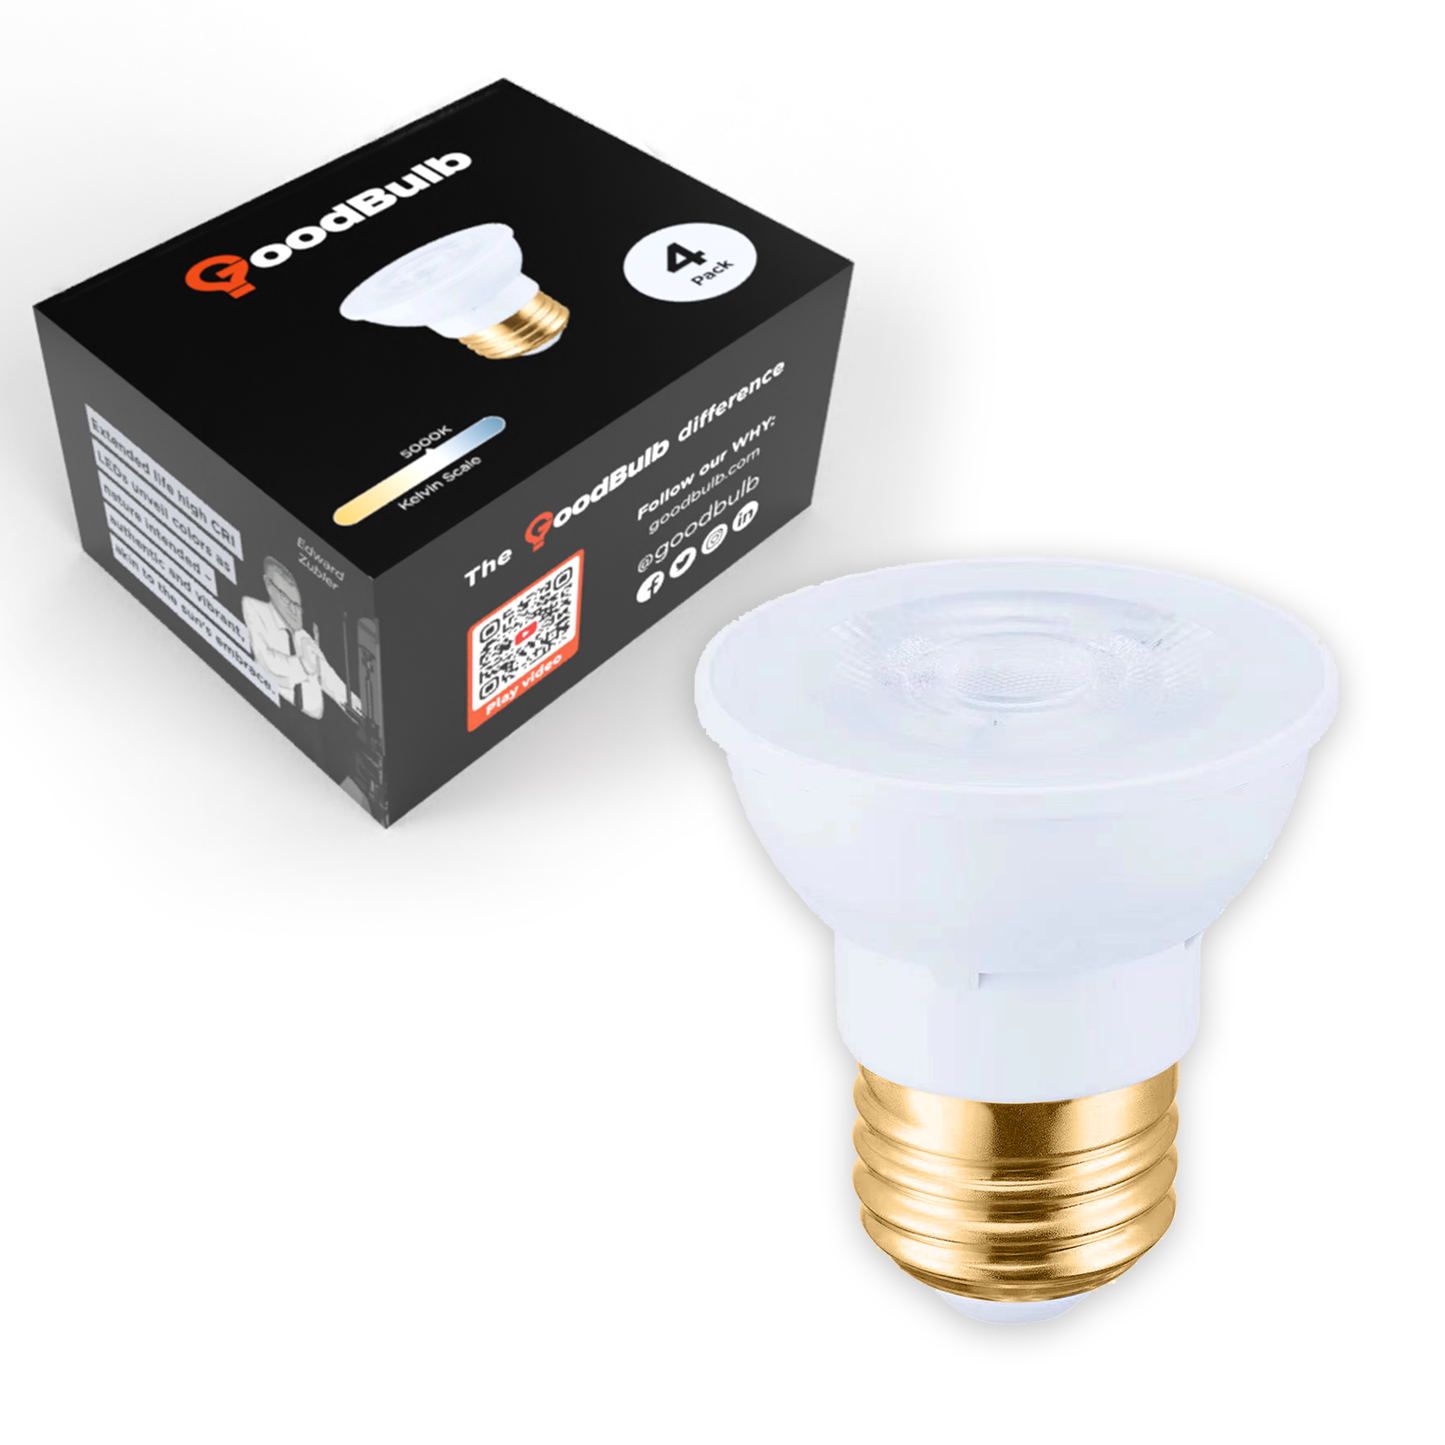 PAR16 LED light bulbs with a clean white 5000K spectrum and can last for 25,000 hours and is dimmable. Showing box in background.